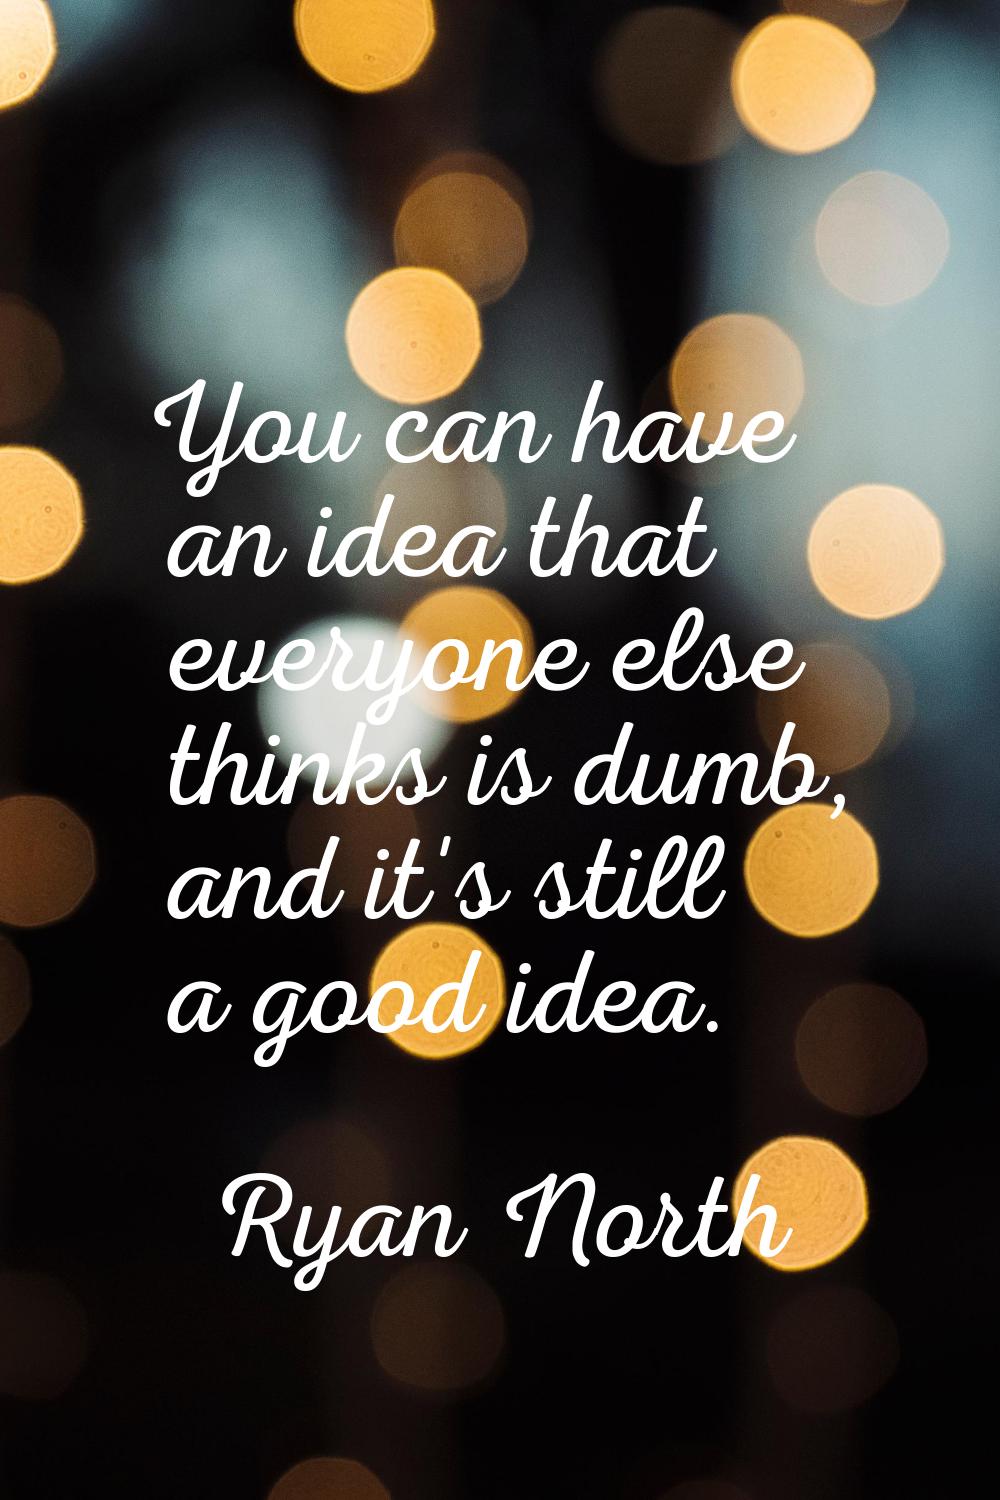 You can have an idea that everyone else thinks is dumb, and it's still a good idea.